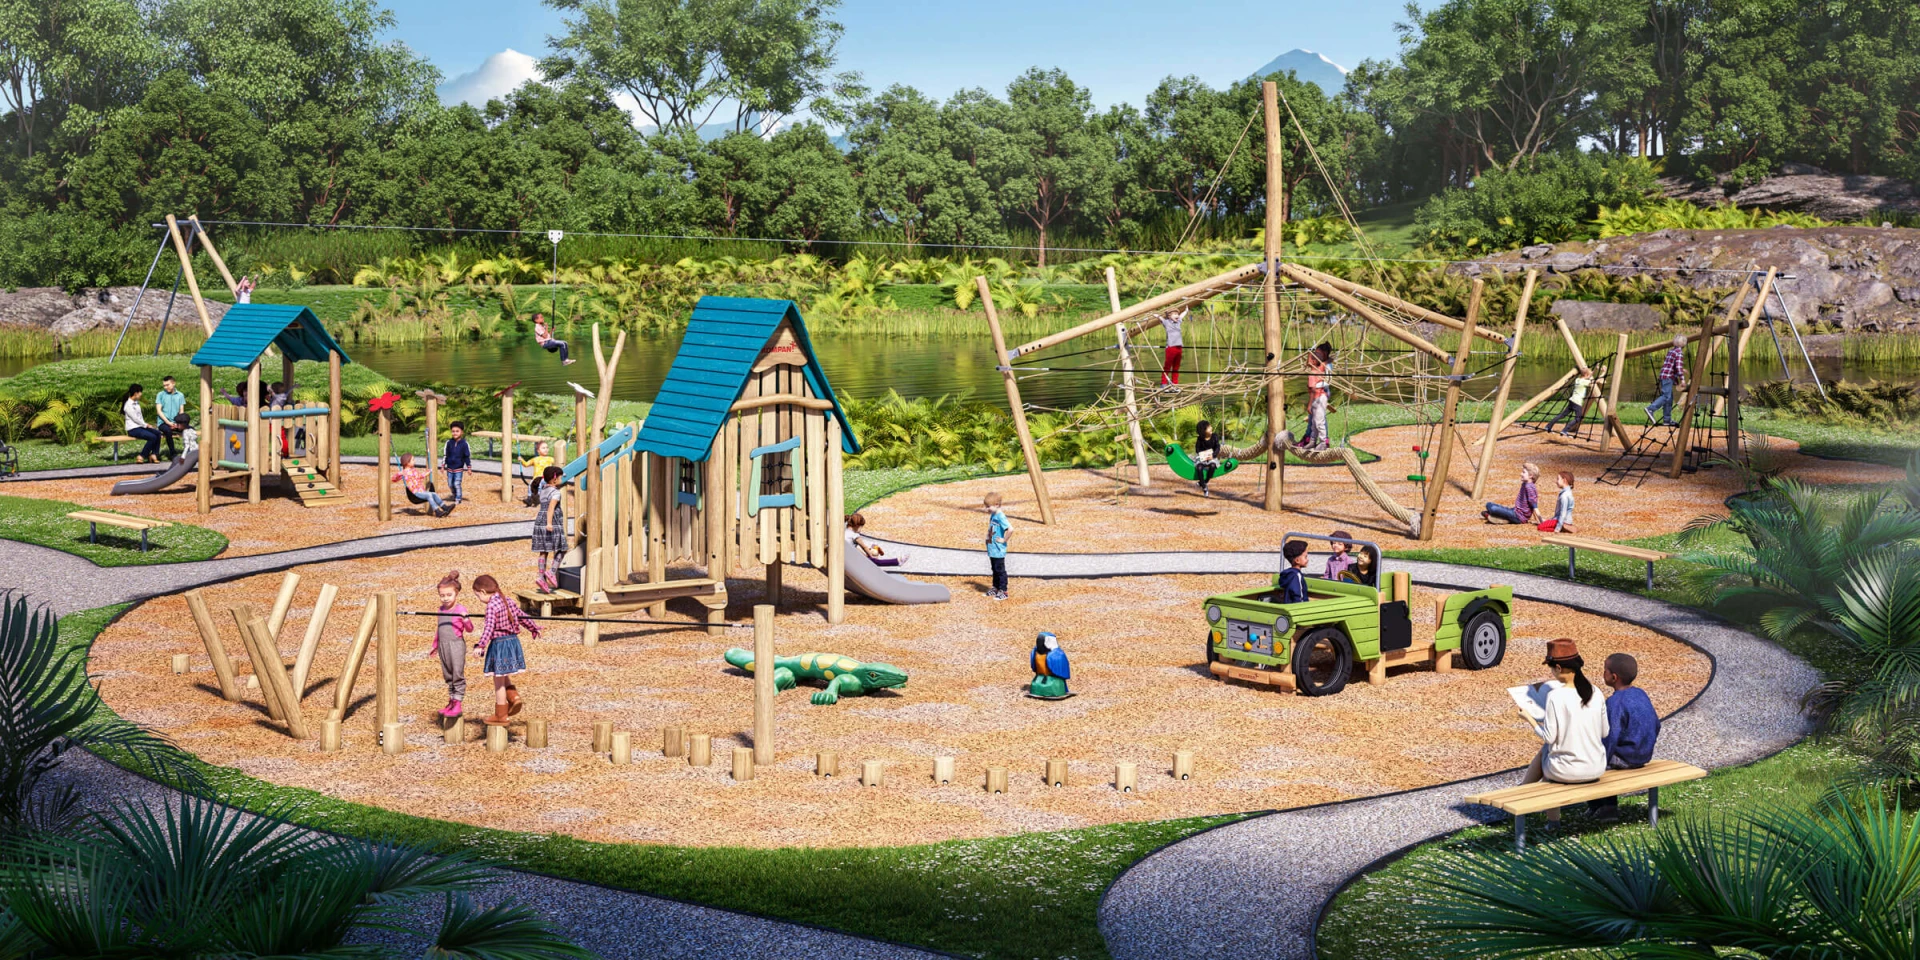 Design idea for a natural wooden playground in a park